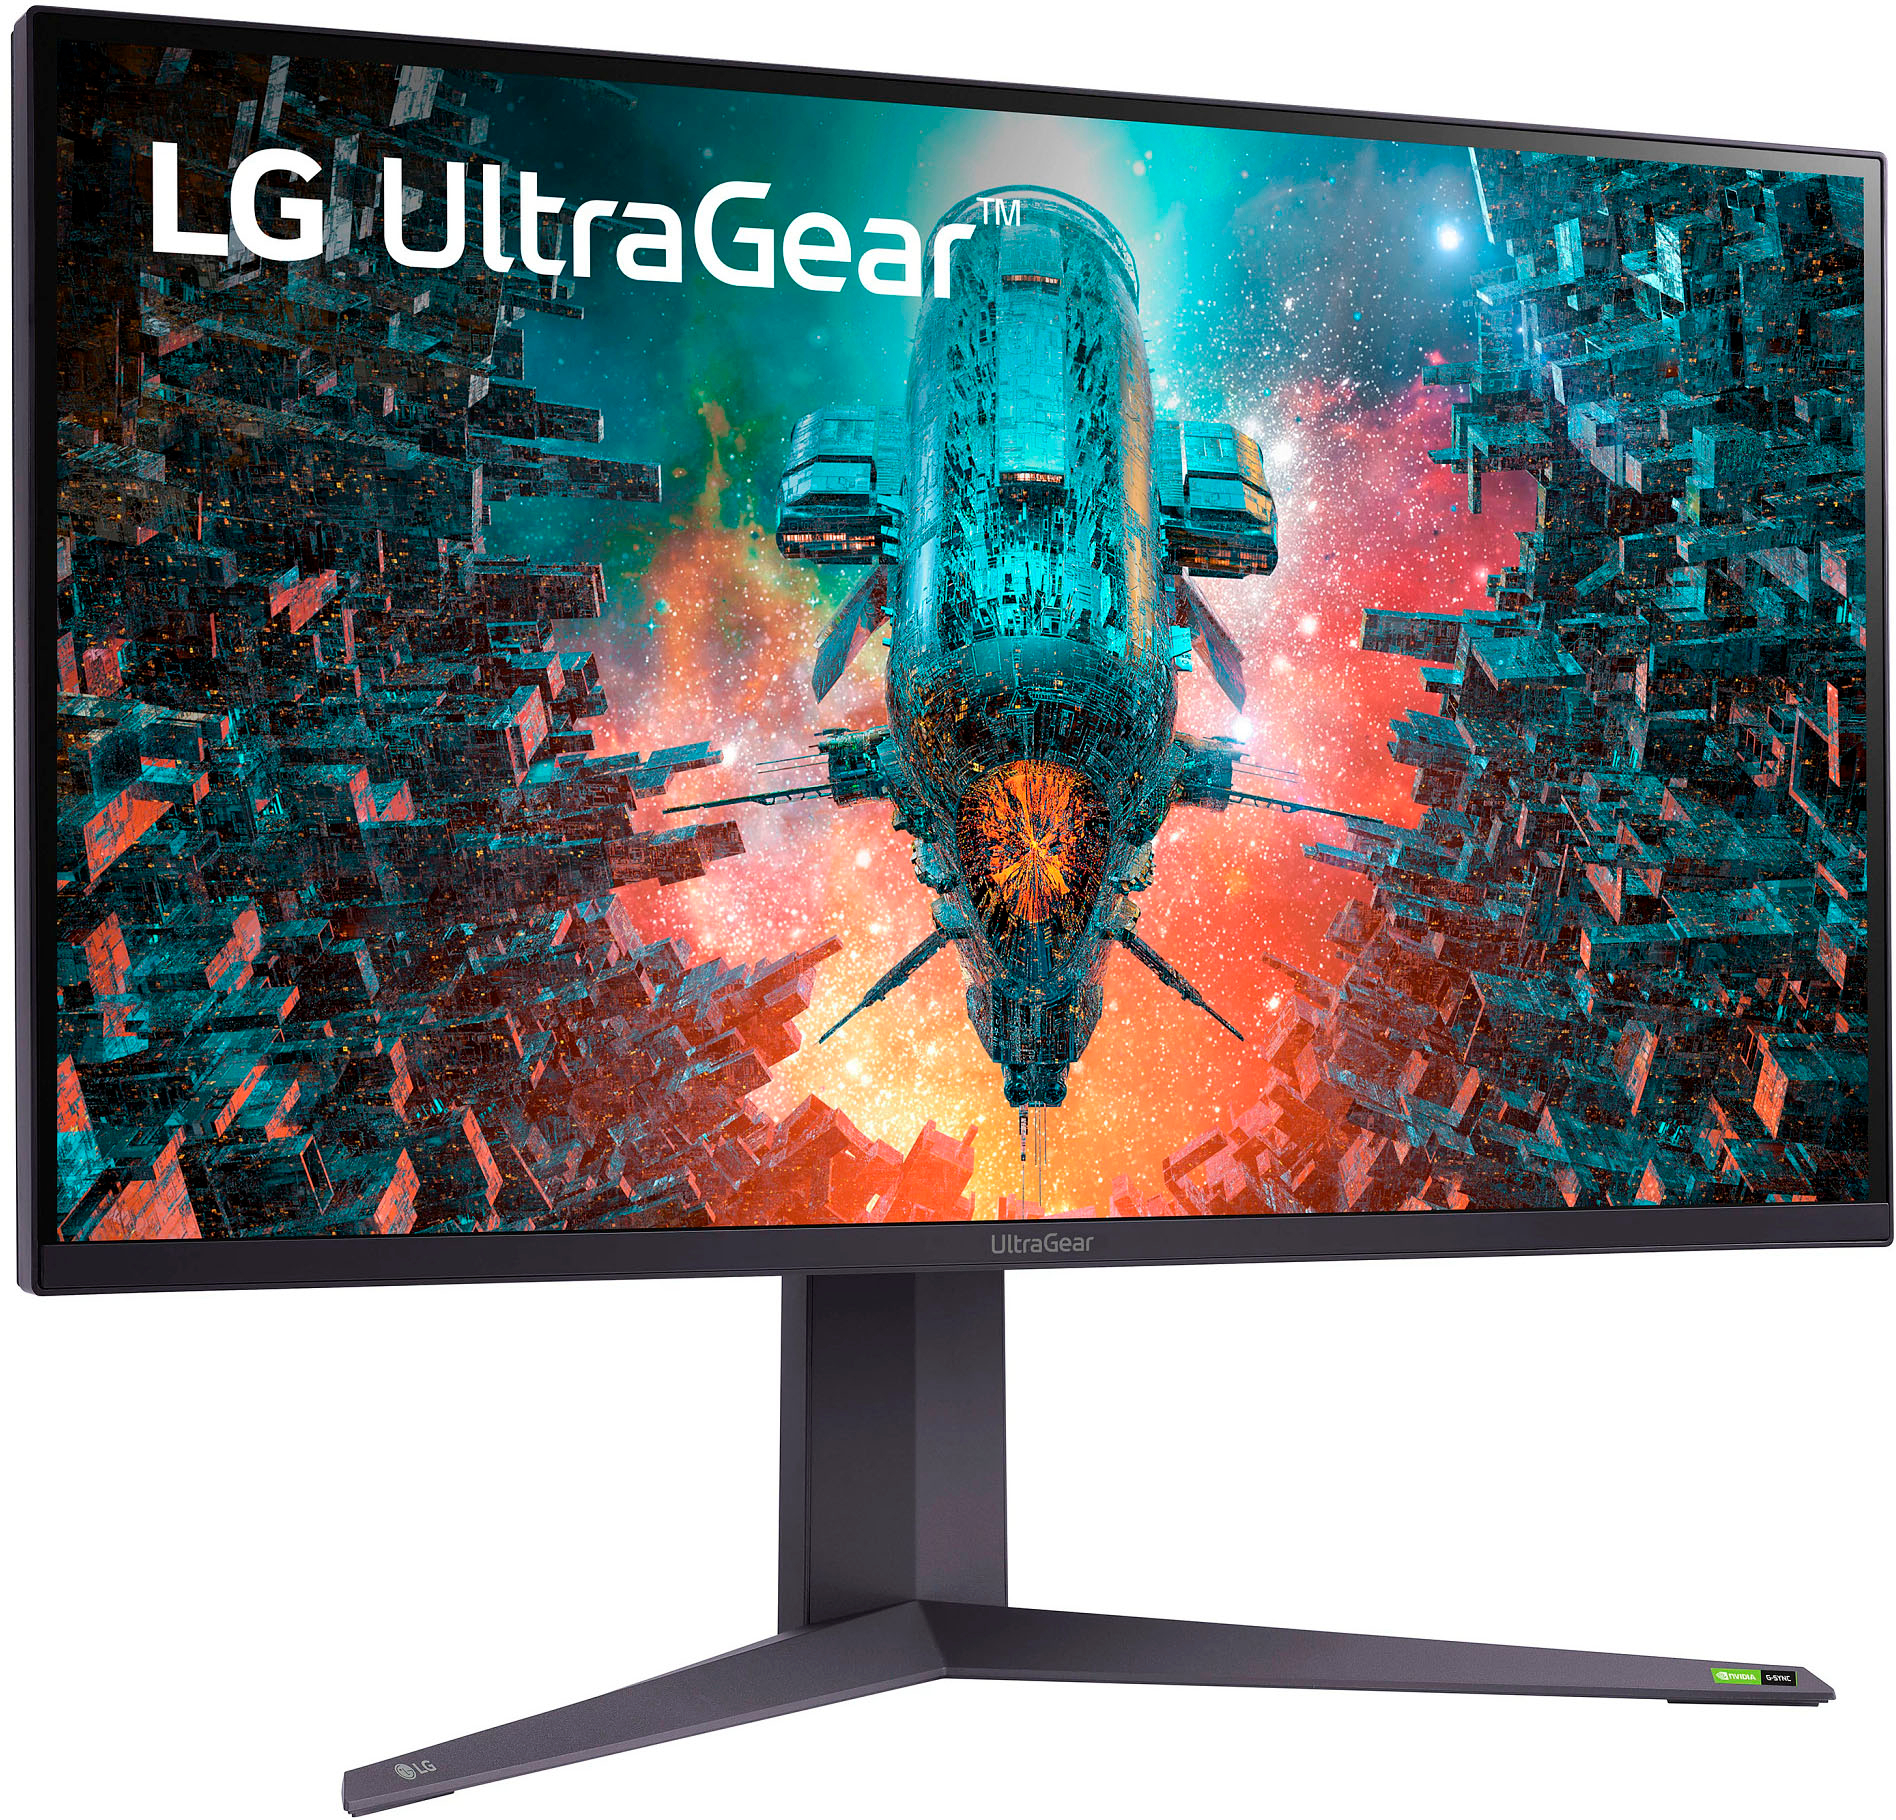 Angle View: LG - UltraGear 32" IPS LED 4K UHD 1-ms G-SYNC Compatible and AMD FreeSync Premium Pro Monitor with HDR (HDMI, DisplayPort) - Black